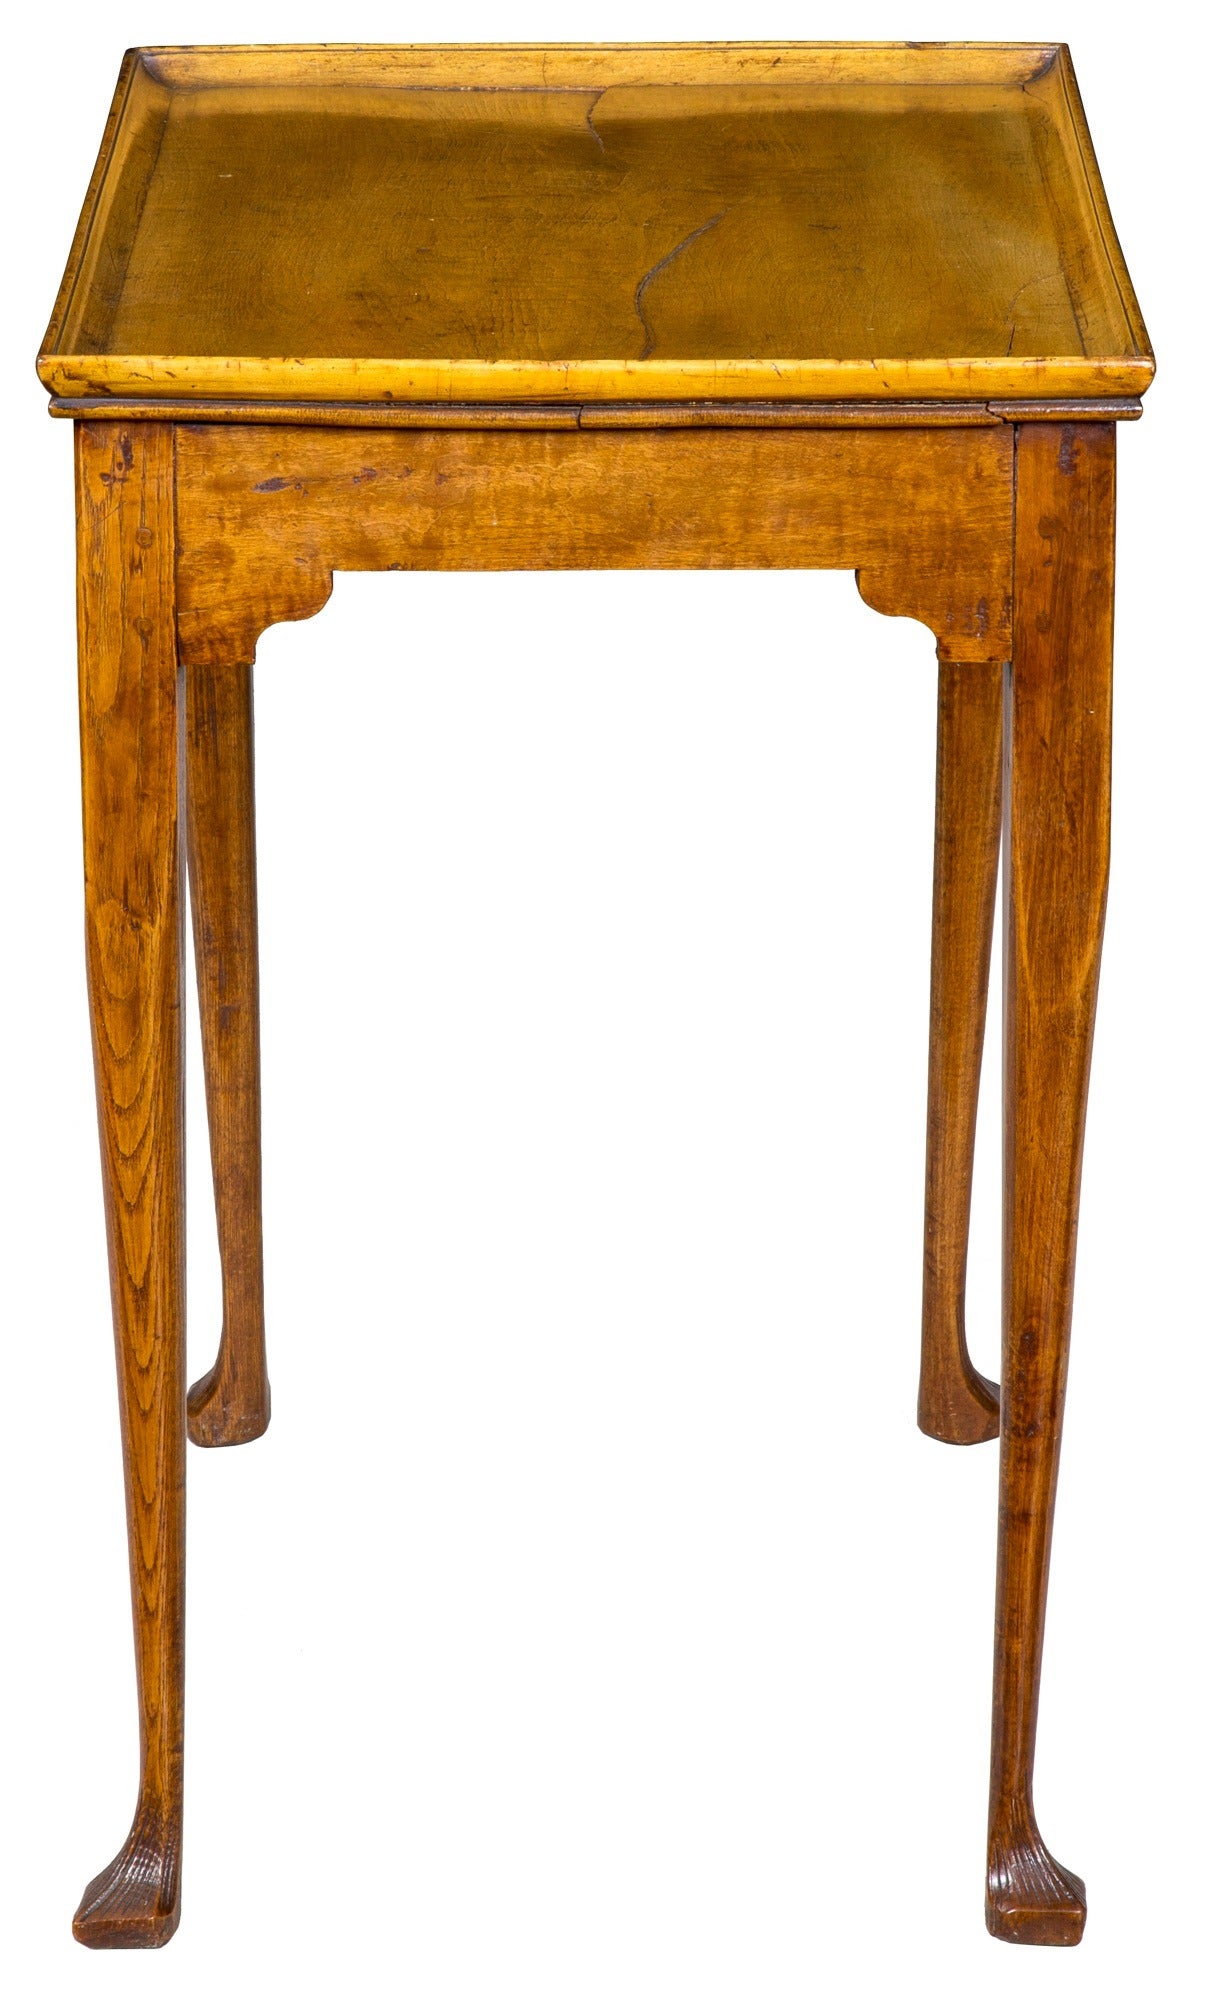 This is a small-scale tea table composed of soft maple and ash, a wood which appears on either side of the pond. Looking at the structure, the sides, from underneath, are very roughly hewn, as is the style of the leg. Therefore, an earlier than